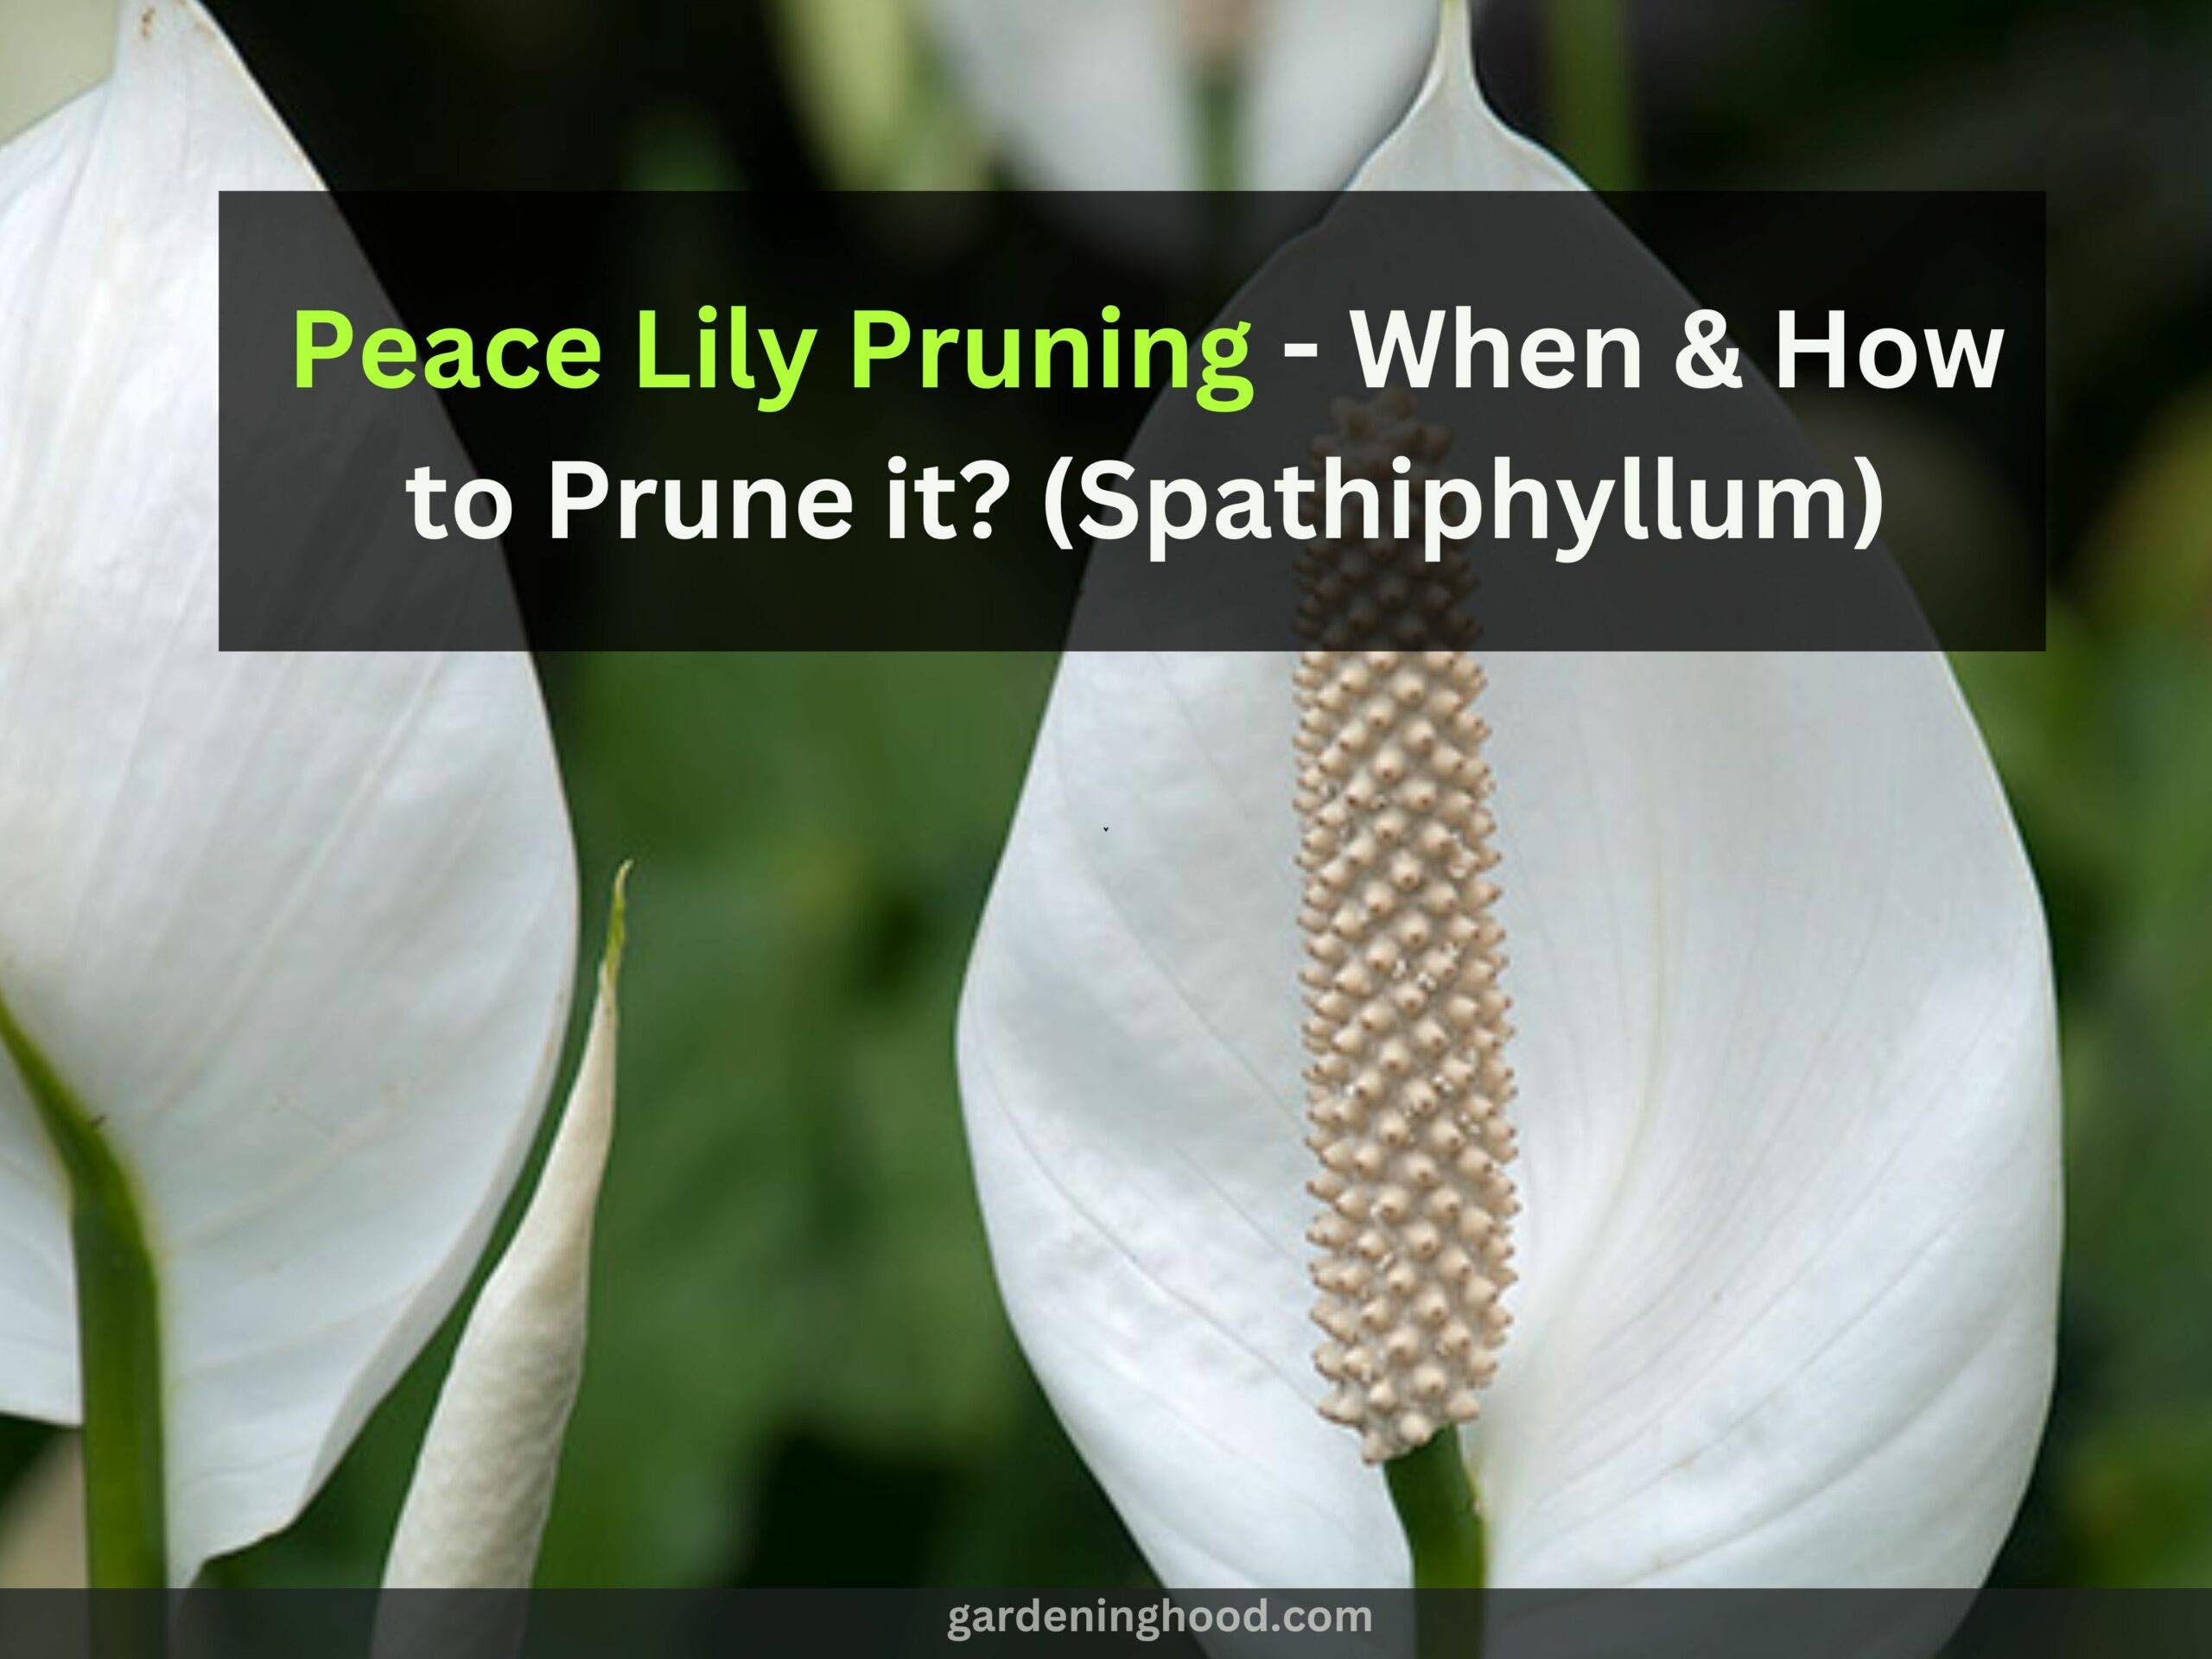 Peace Lily Pruning - When & How to Prune it? (Spathiphyllum)